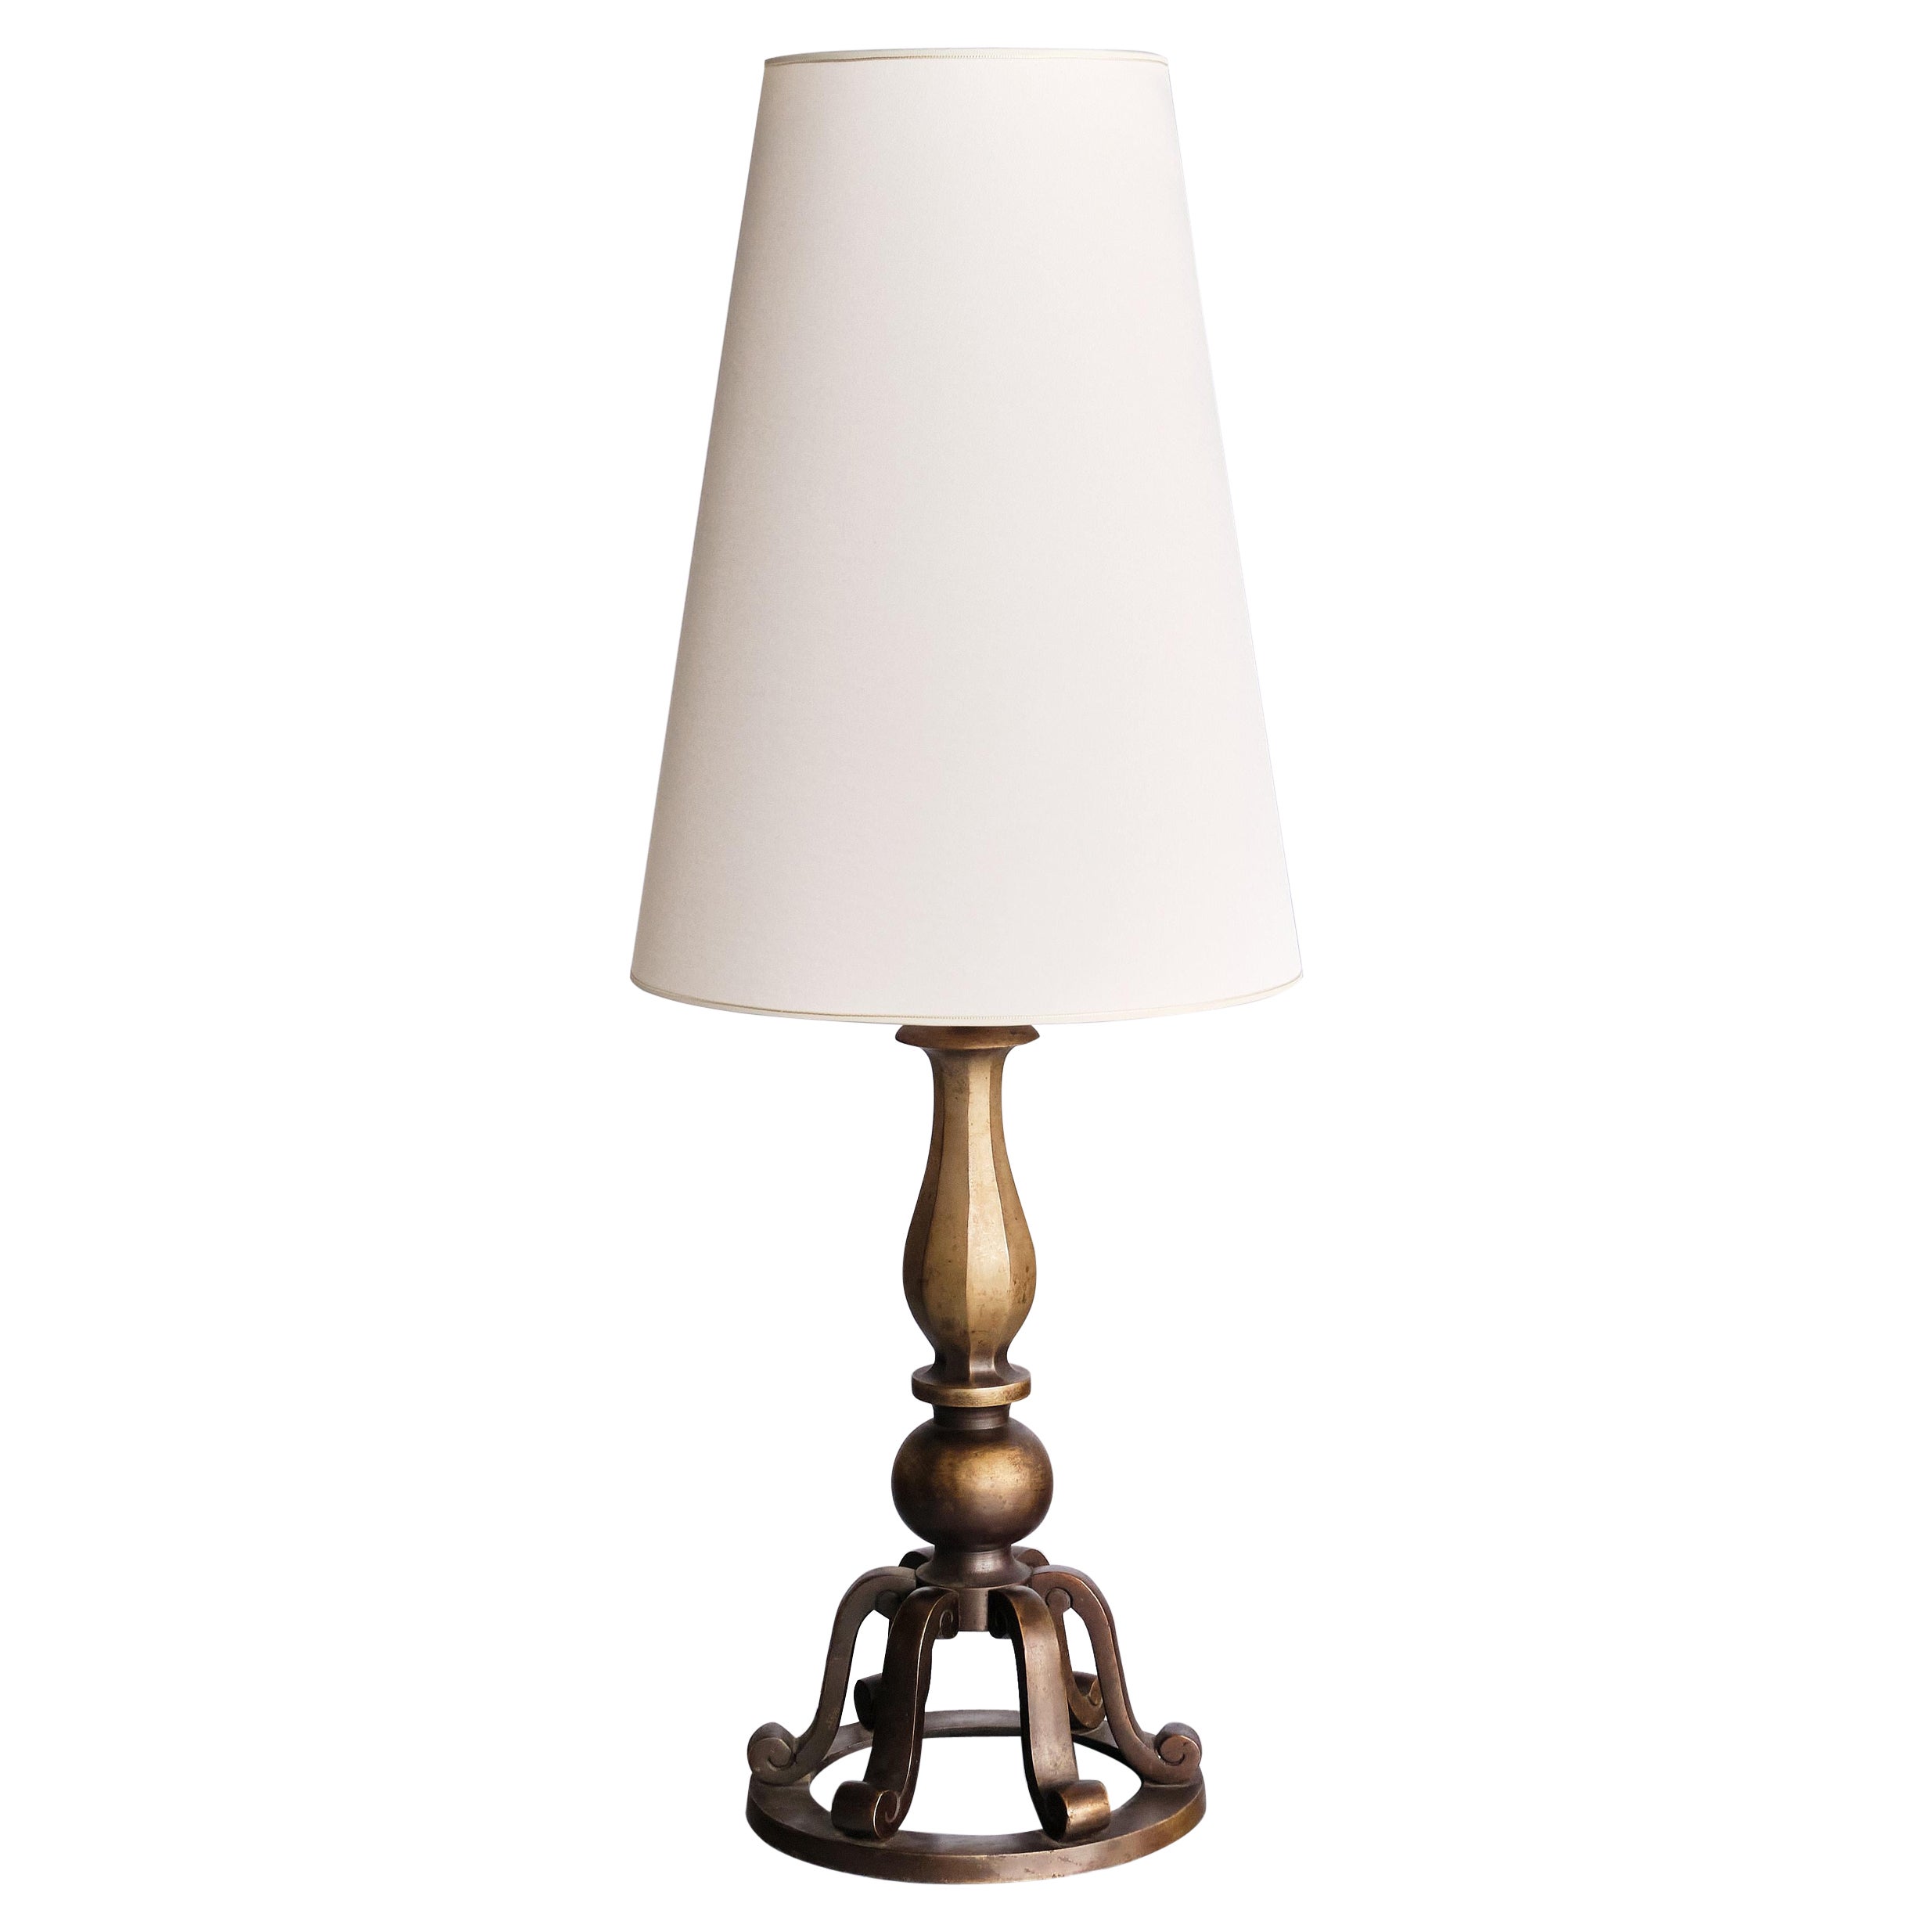 Swedish Grace Brass Table Lamp by C.G. Hallberg, Sweden, Early 1930s For Sale